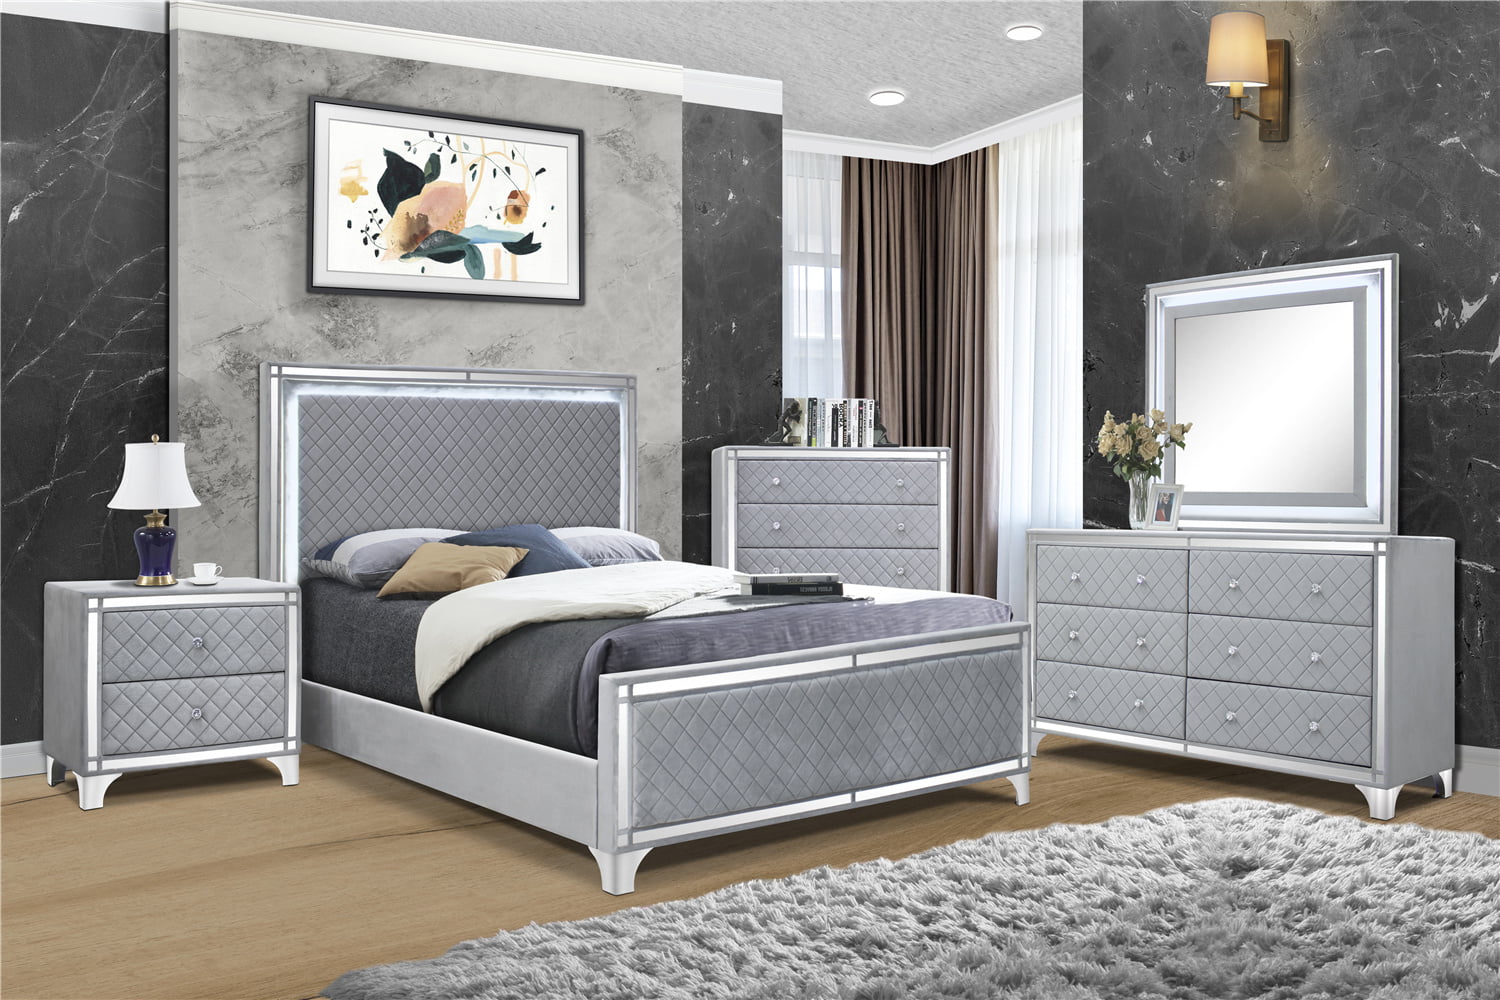 5 Piece Queen Size Bedroom Set, Modern Bedroom Furniture Sets with Queen  Bed Frame, Nightstand, Chest, Dresser and Mirror